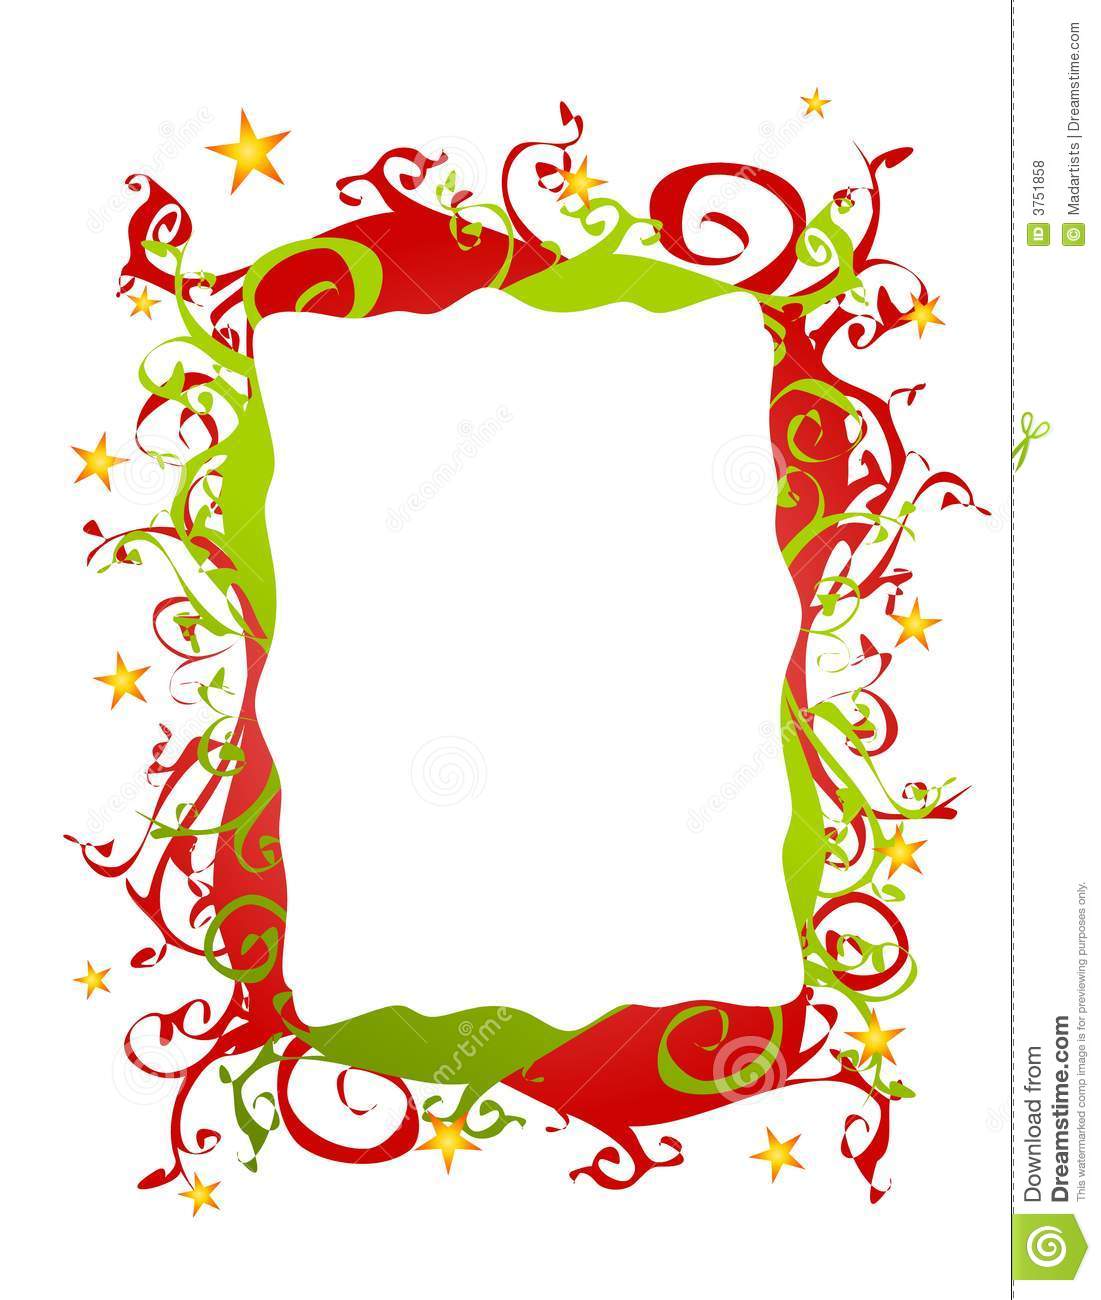 Christmas Borders For Microsoft Word Free download on